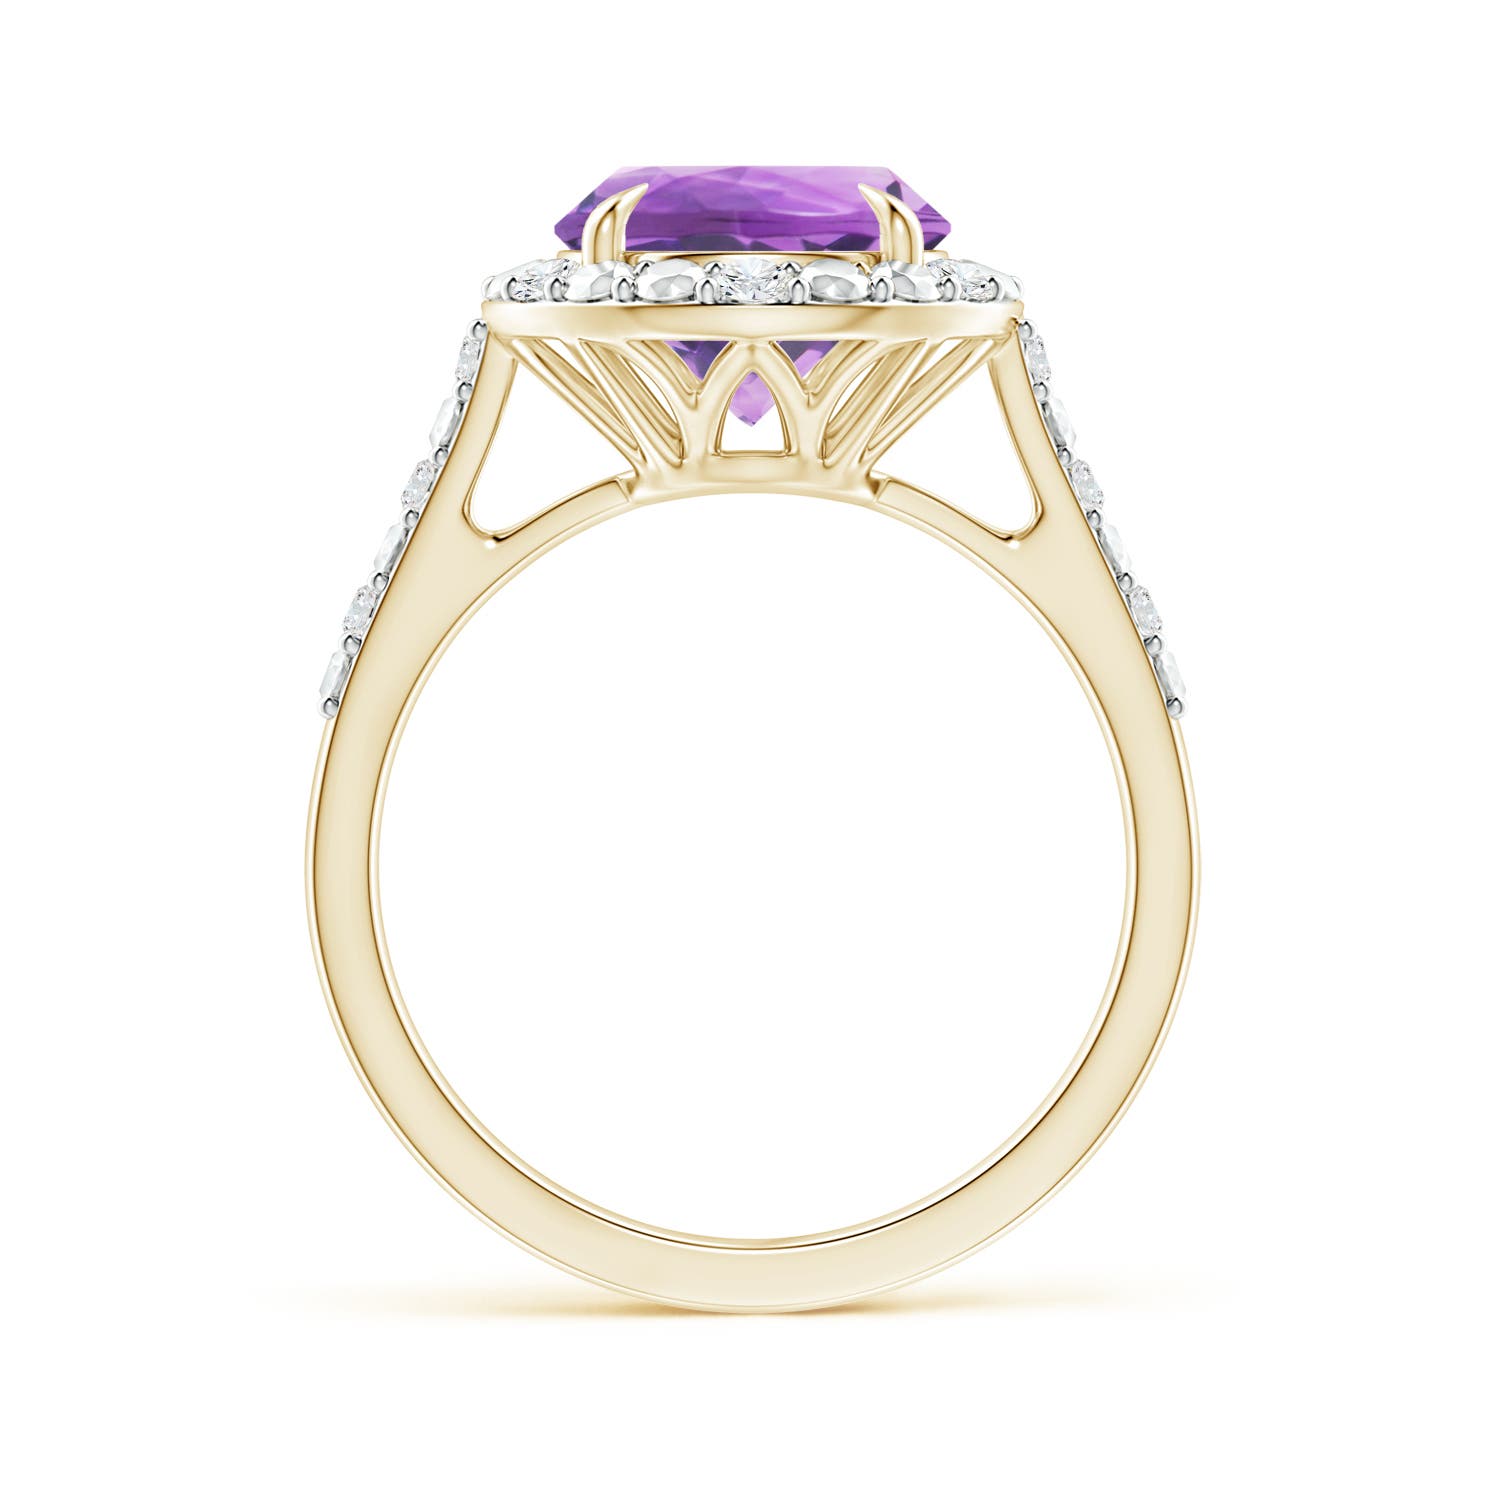 A - Amethyst / 2.61 CT / 14 KT Yellow Gold